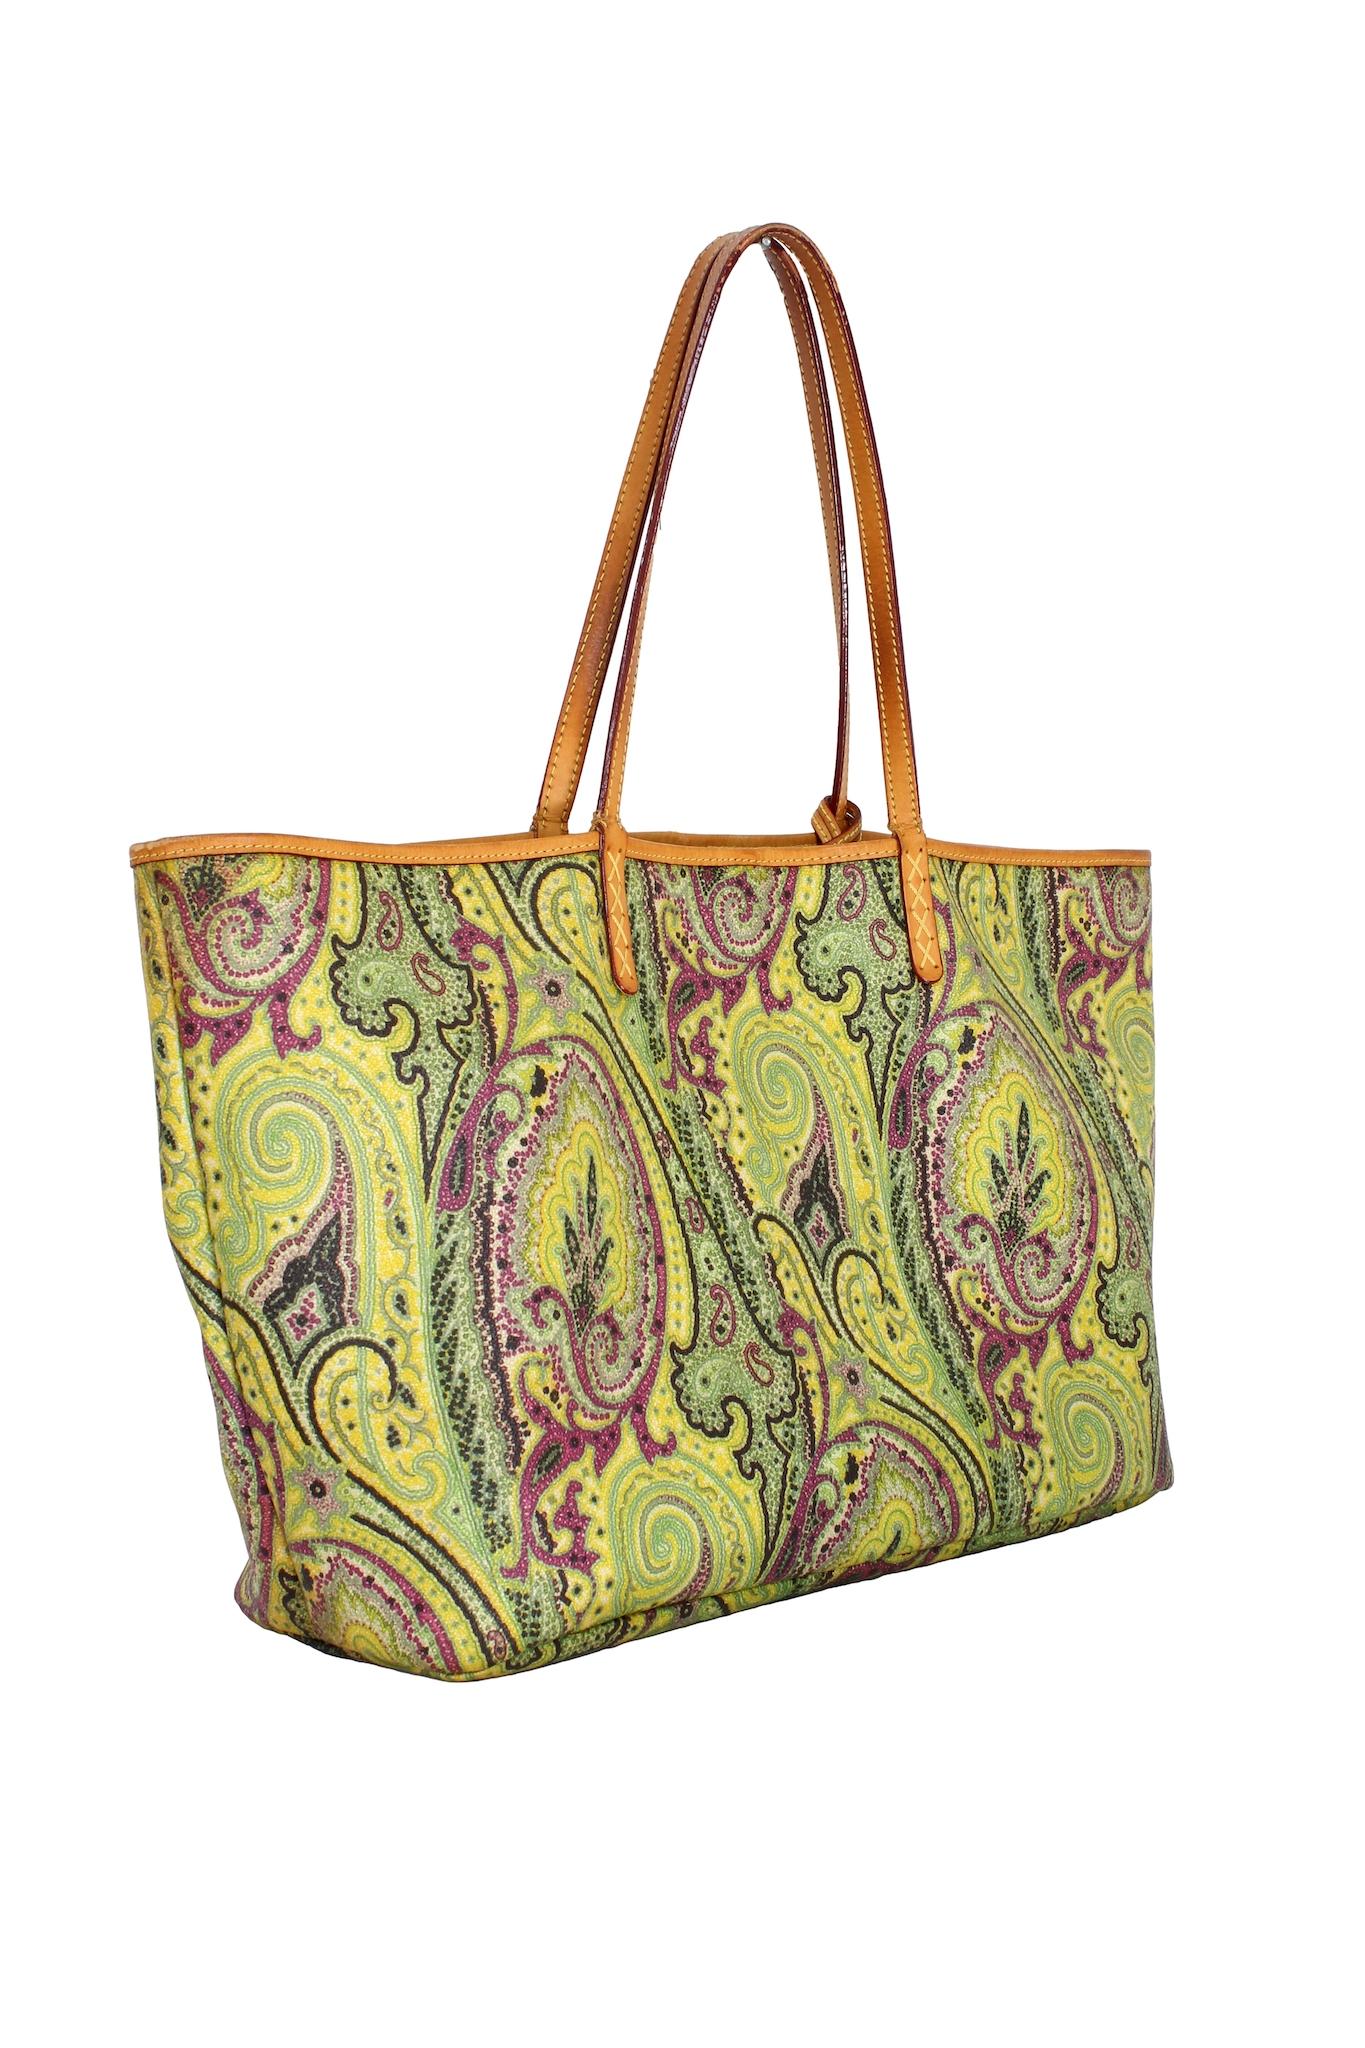 Etro Green Canvas Paisley Tote Bag 2010s 1